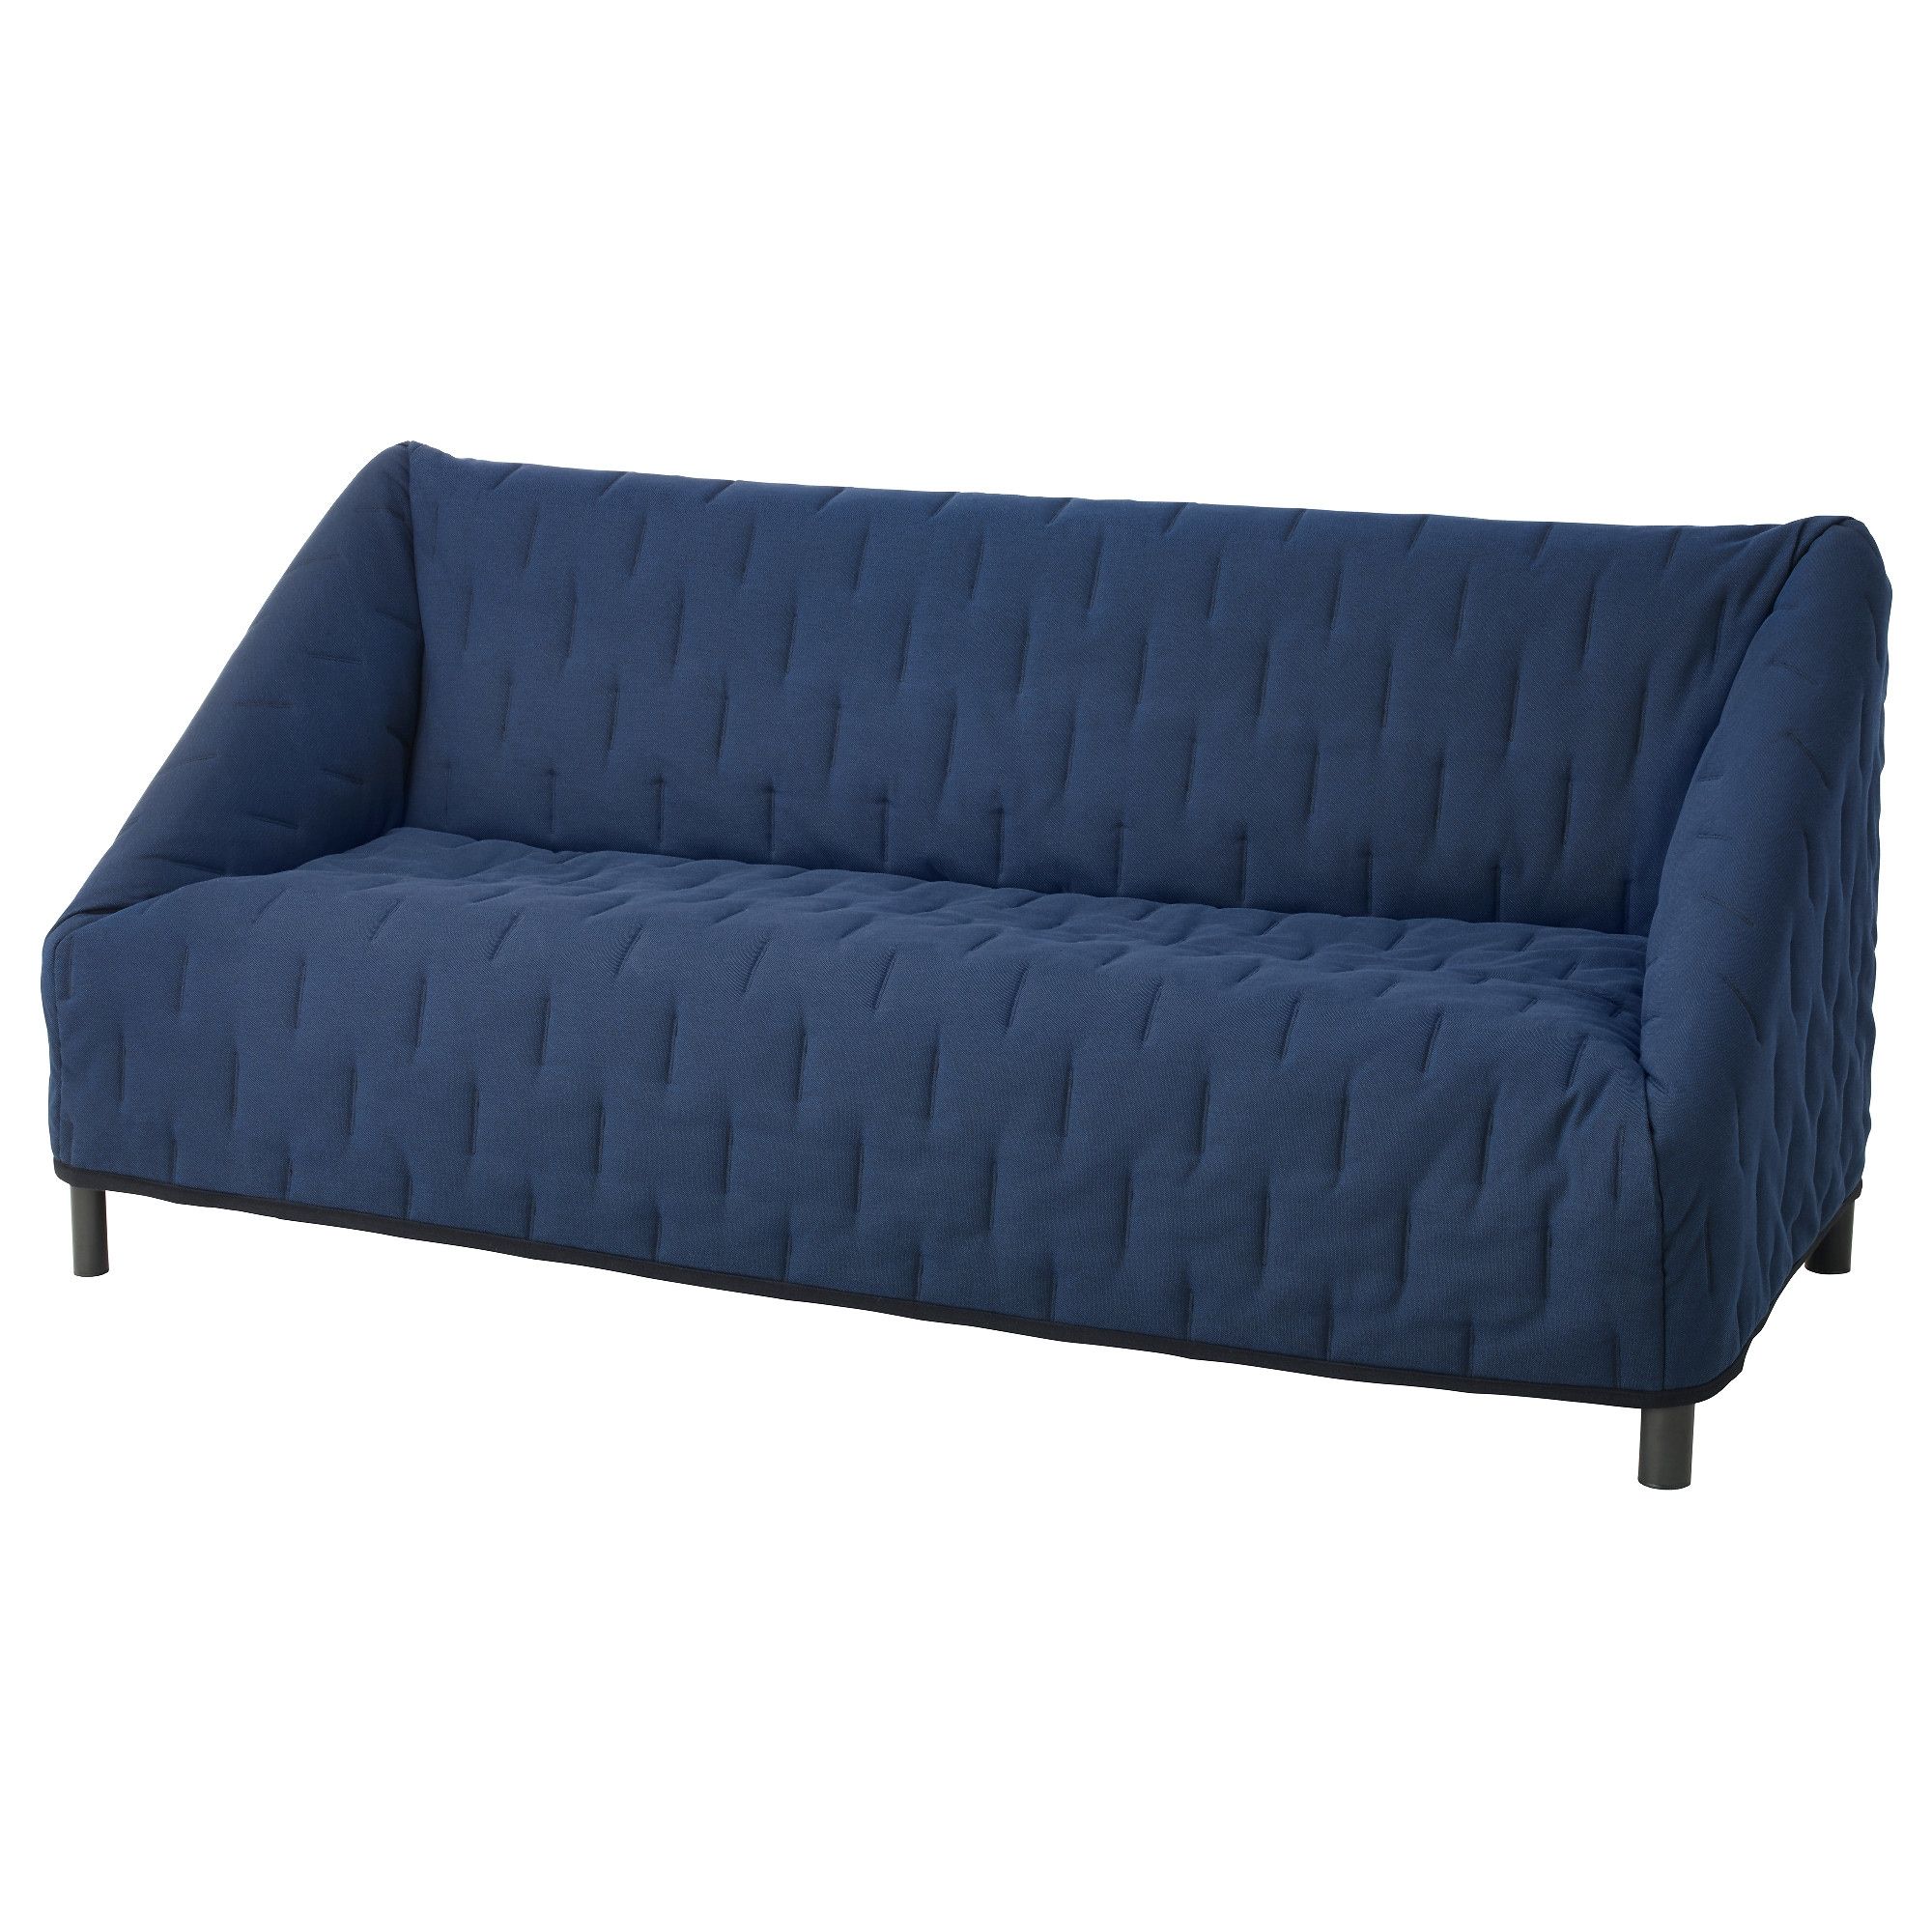 Sofas – Settees, Couches & More | Ikea Intended For Ikea Sofa Chairs (View 6 of 25)